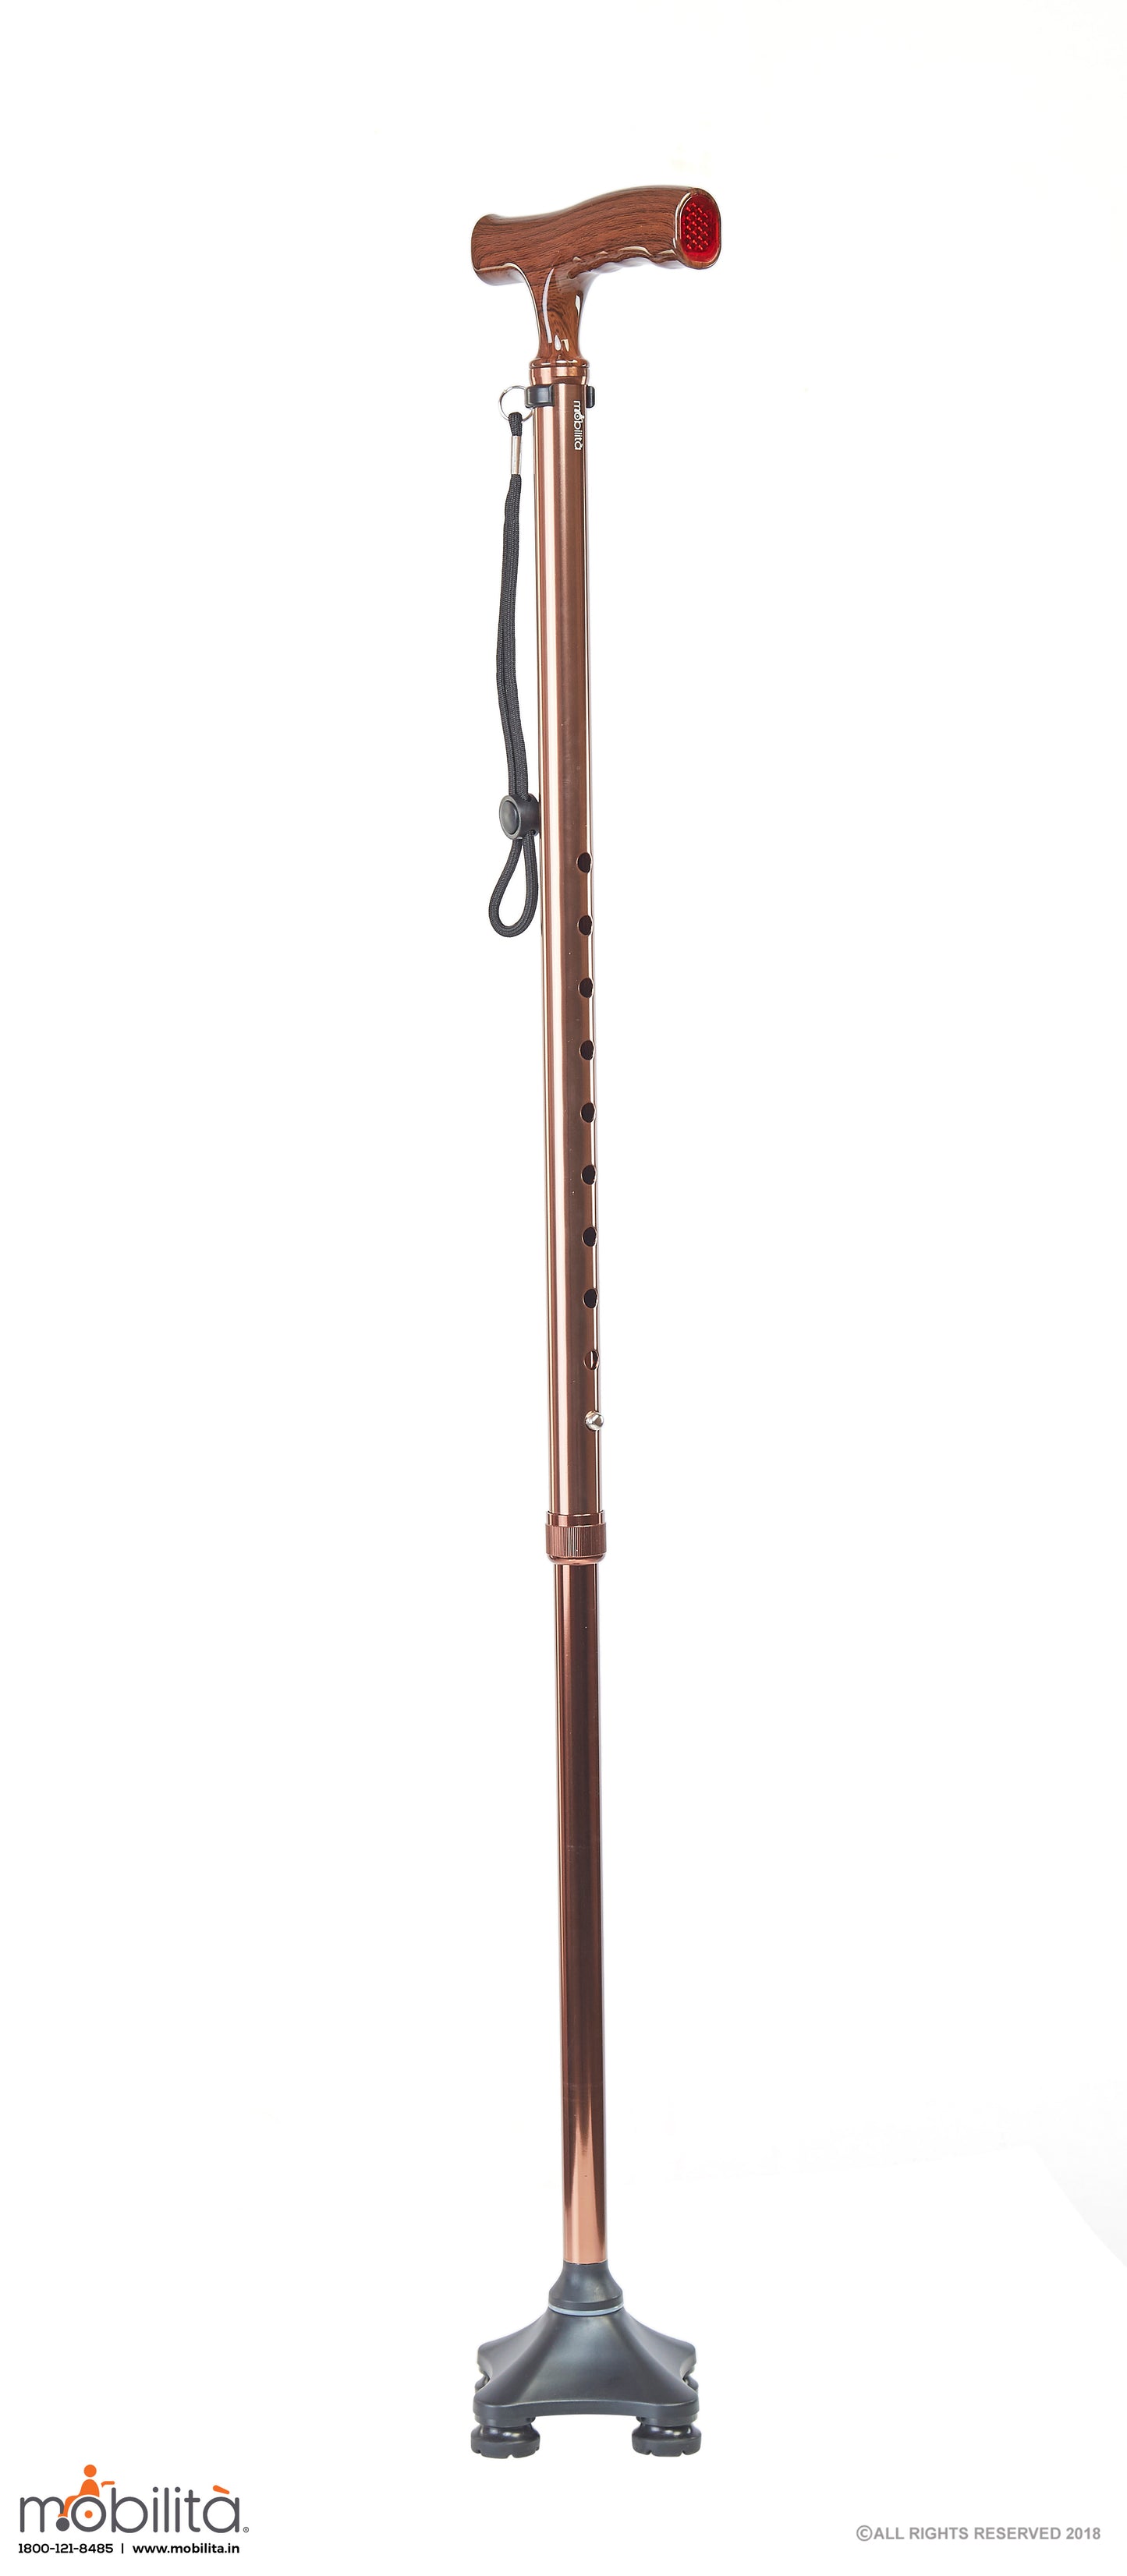 M 703 - Walking Cane - Square Foot - Straight Shank - Champagne Brown